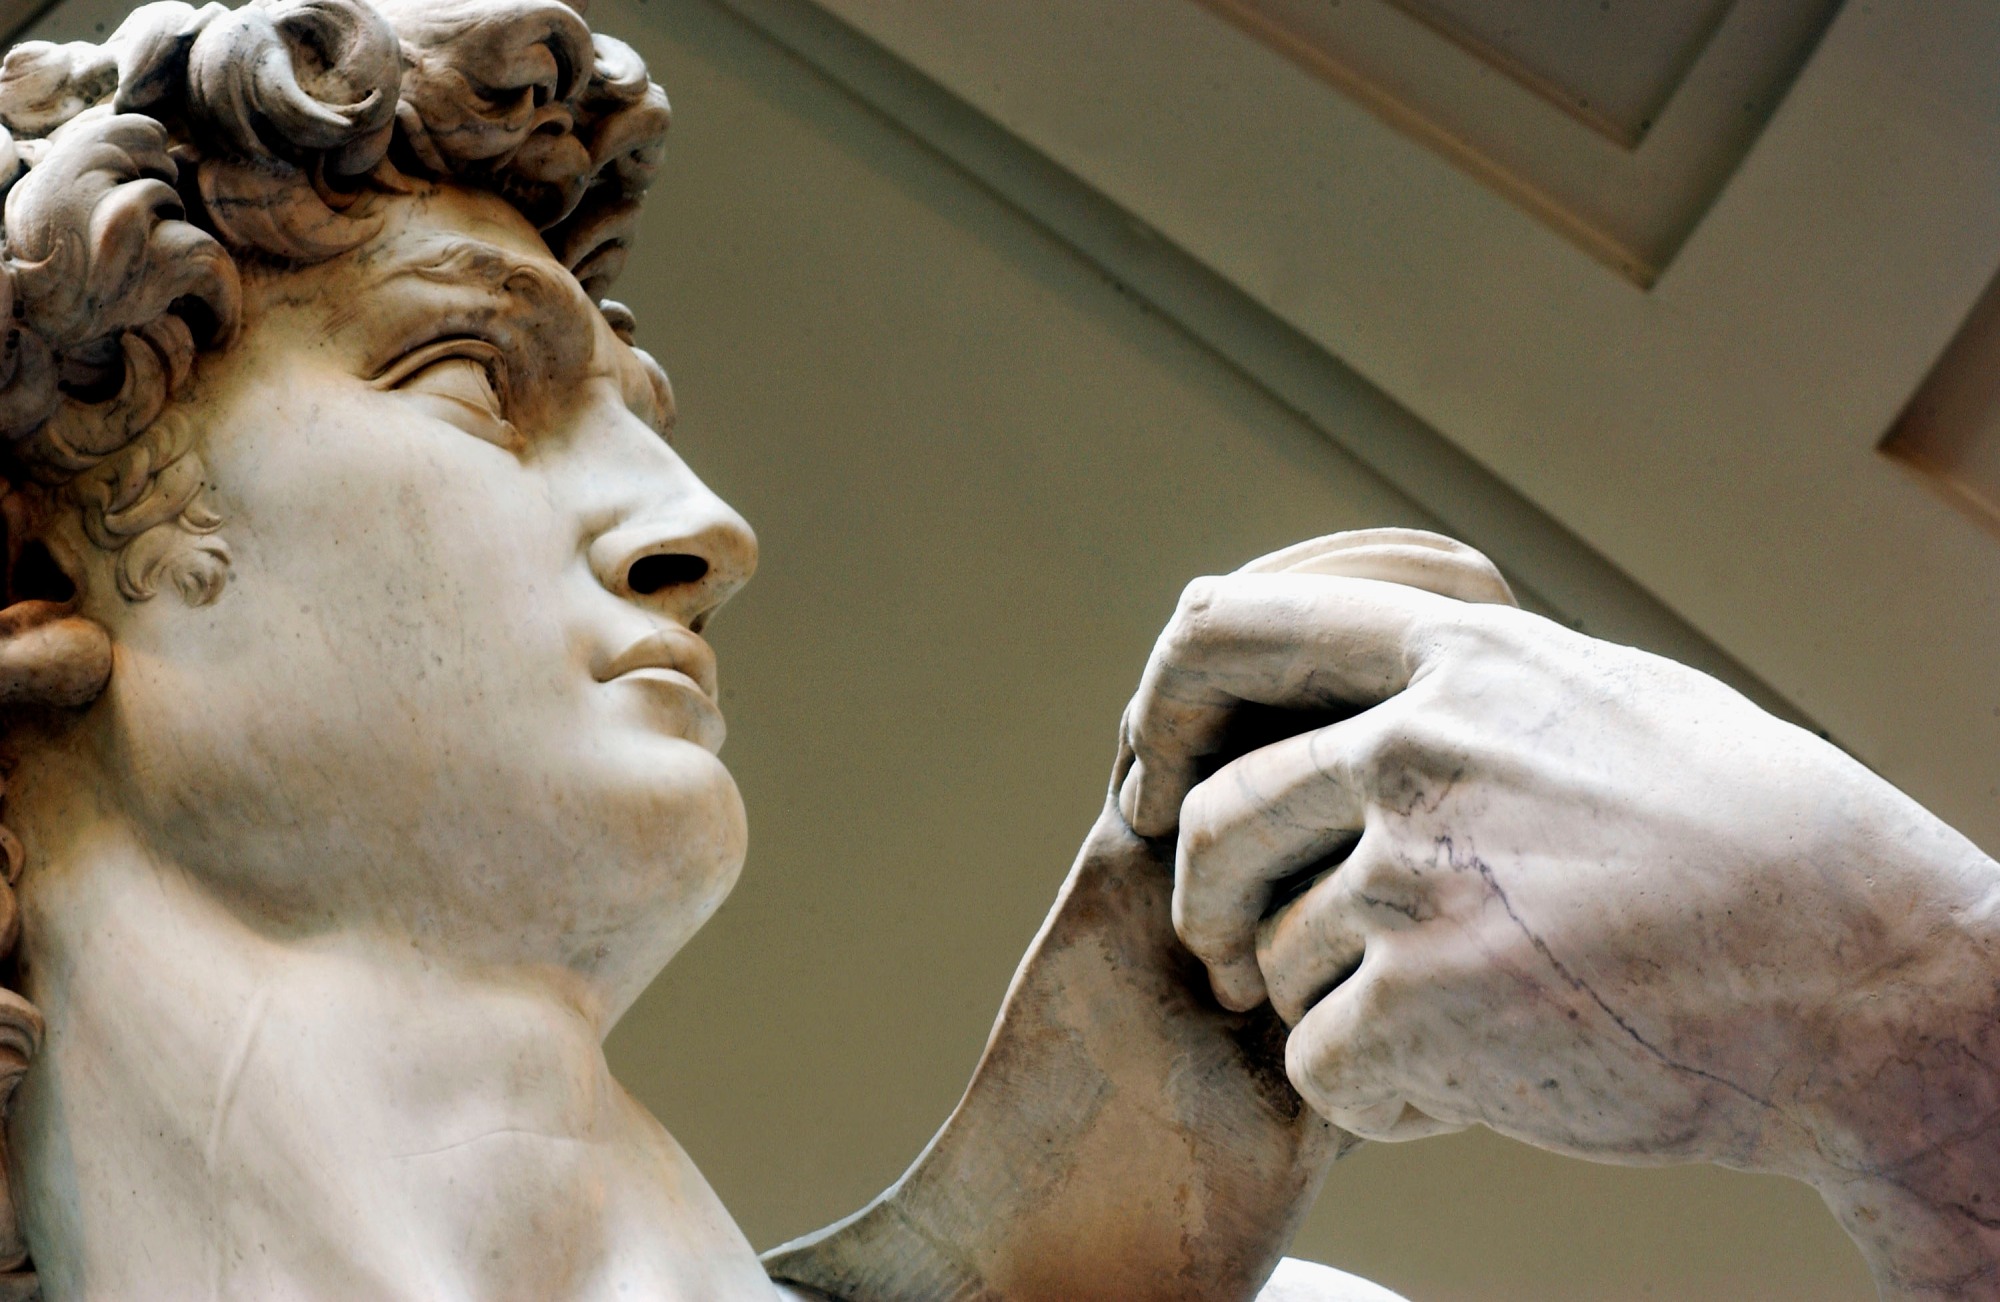 FLORENCE, ITALY - MAY 24:  Restoration work on Michelangelo's masterpiece David is completed, May 24, 2004 at the Galleria dell'Accademia in Florence. The work has taken a painstaking two years to complete with the statue going on show to the public tomorrow . (Photo by Franco Origlia/Getty Images)